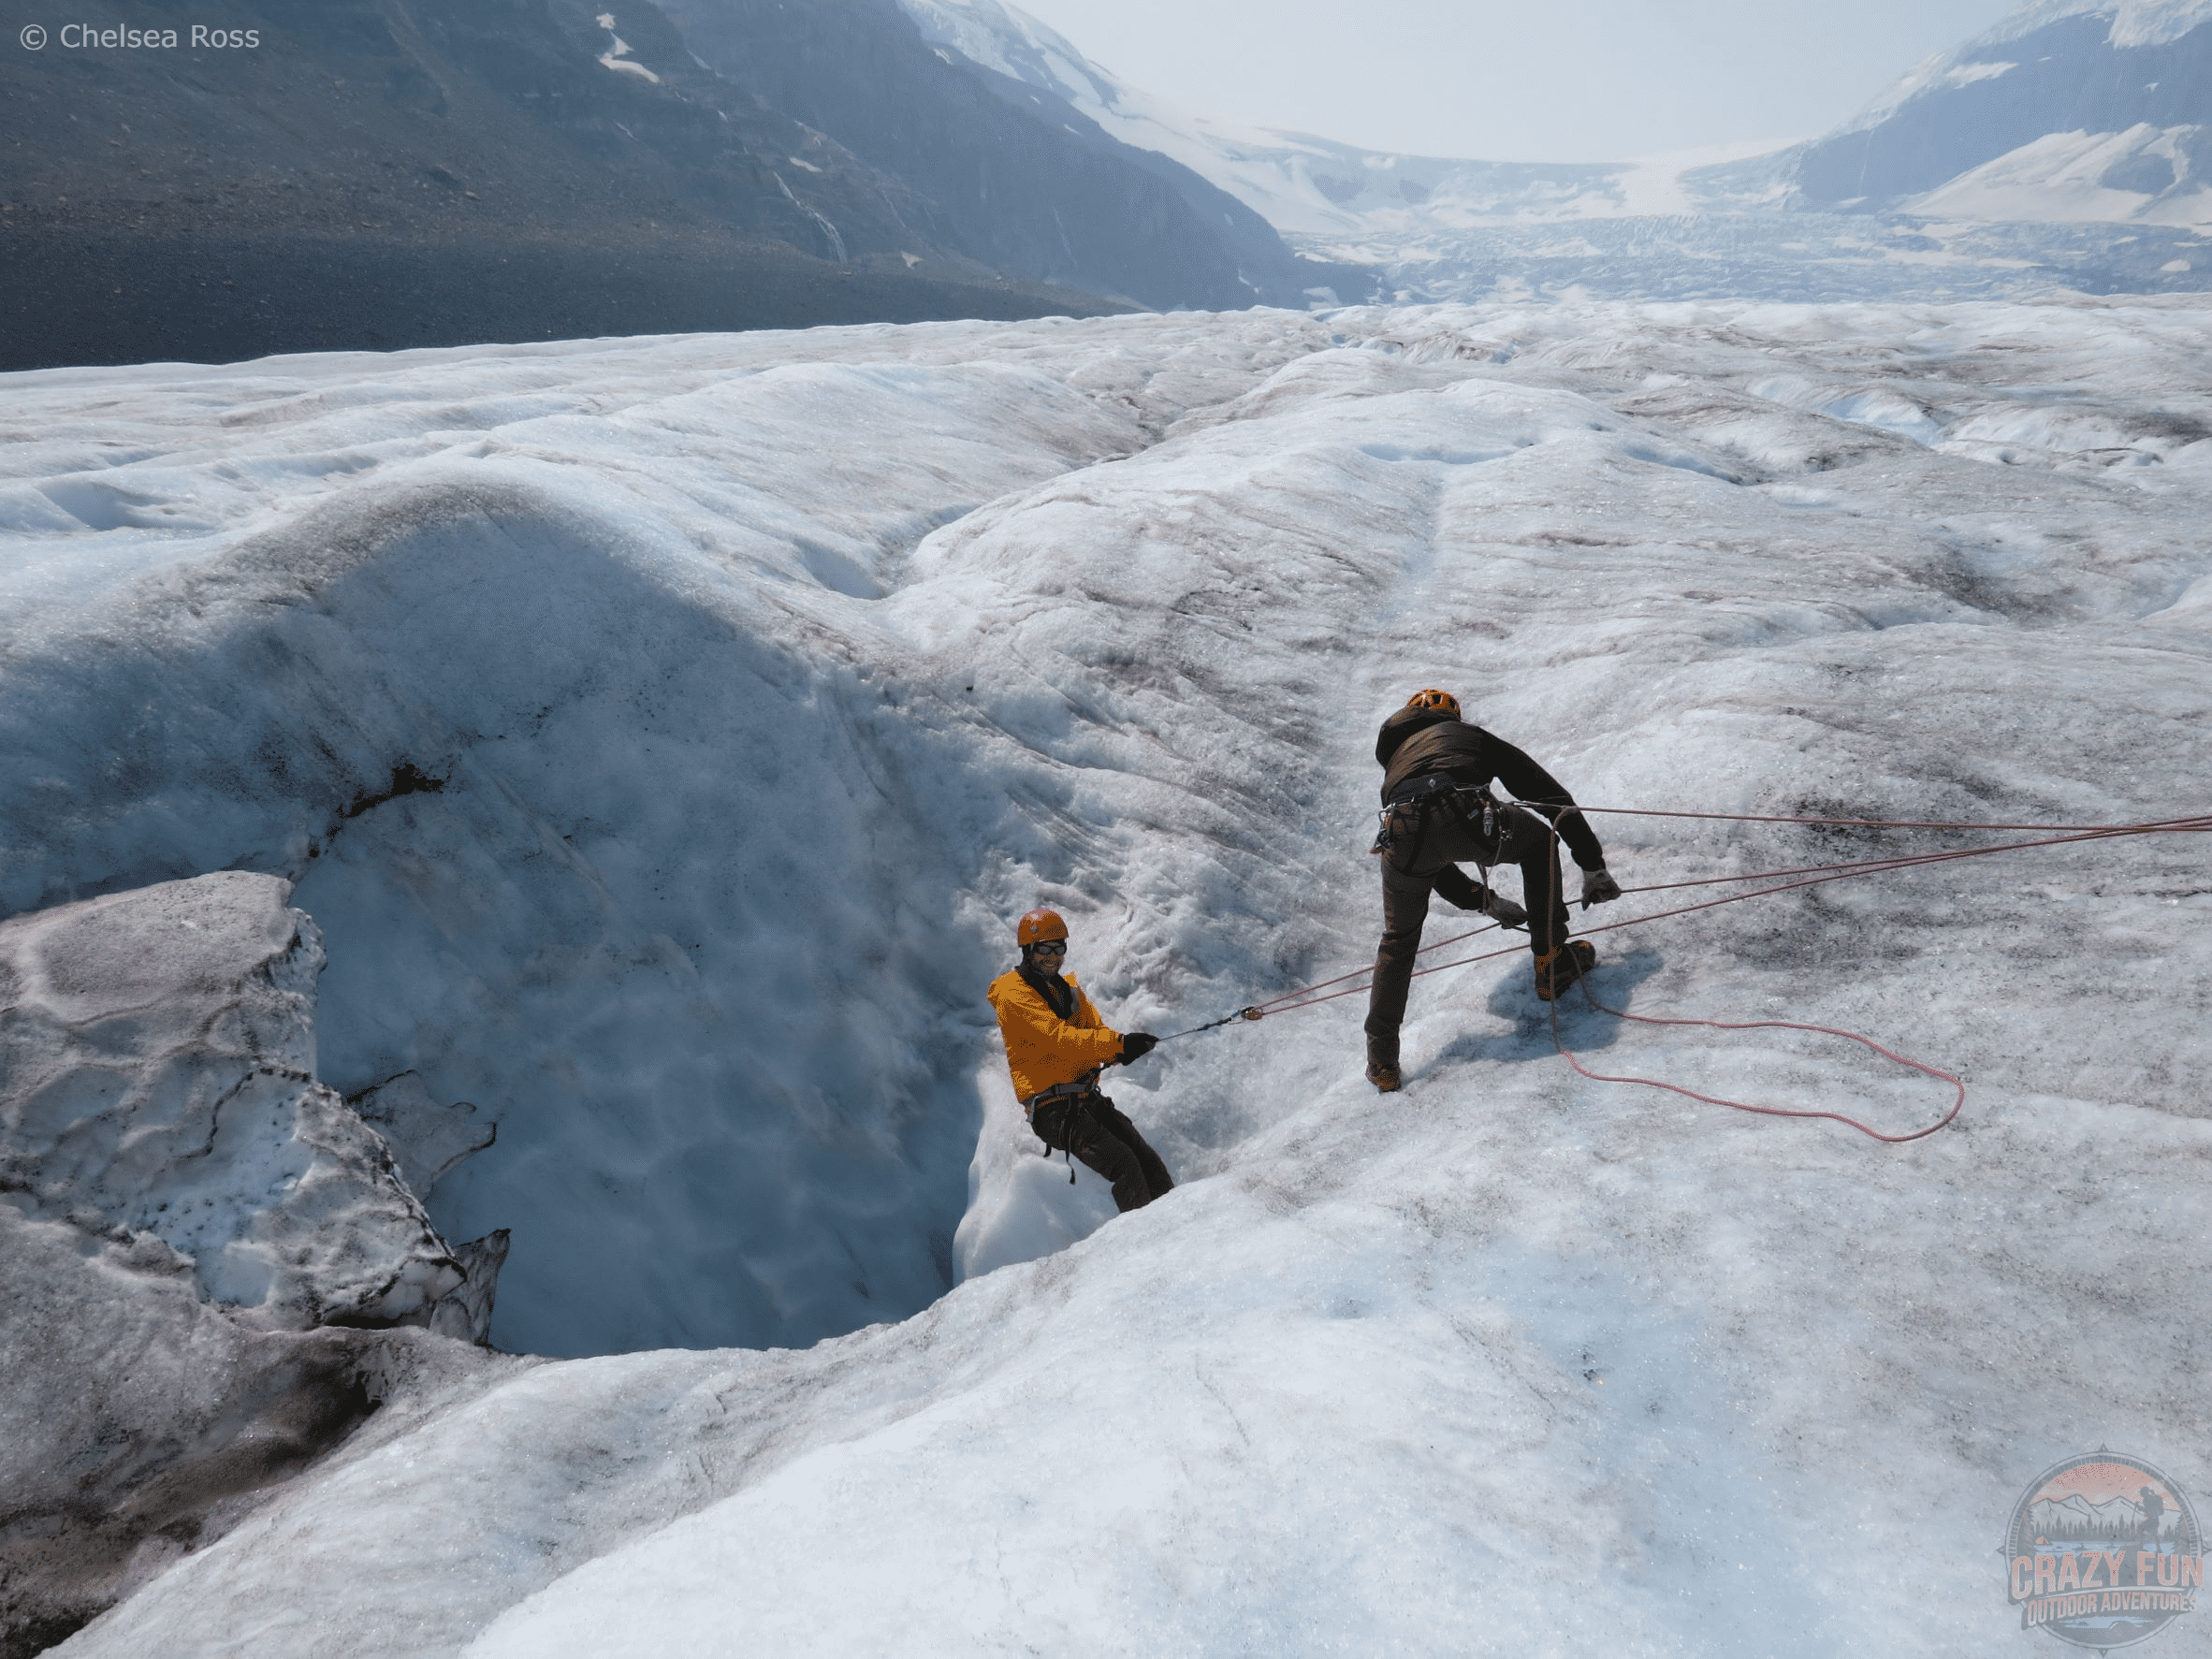 Kris descending into Athabasca Glacier while the guide helps guide him down. The glacier can be seen around him.